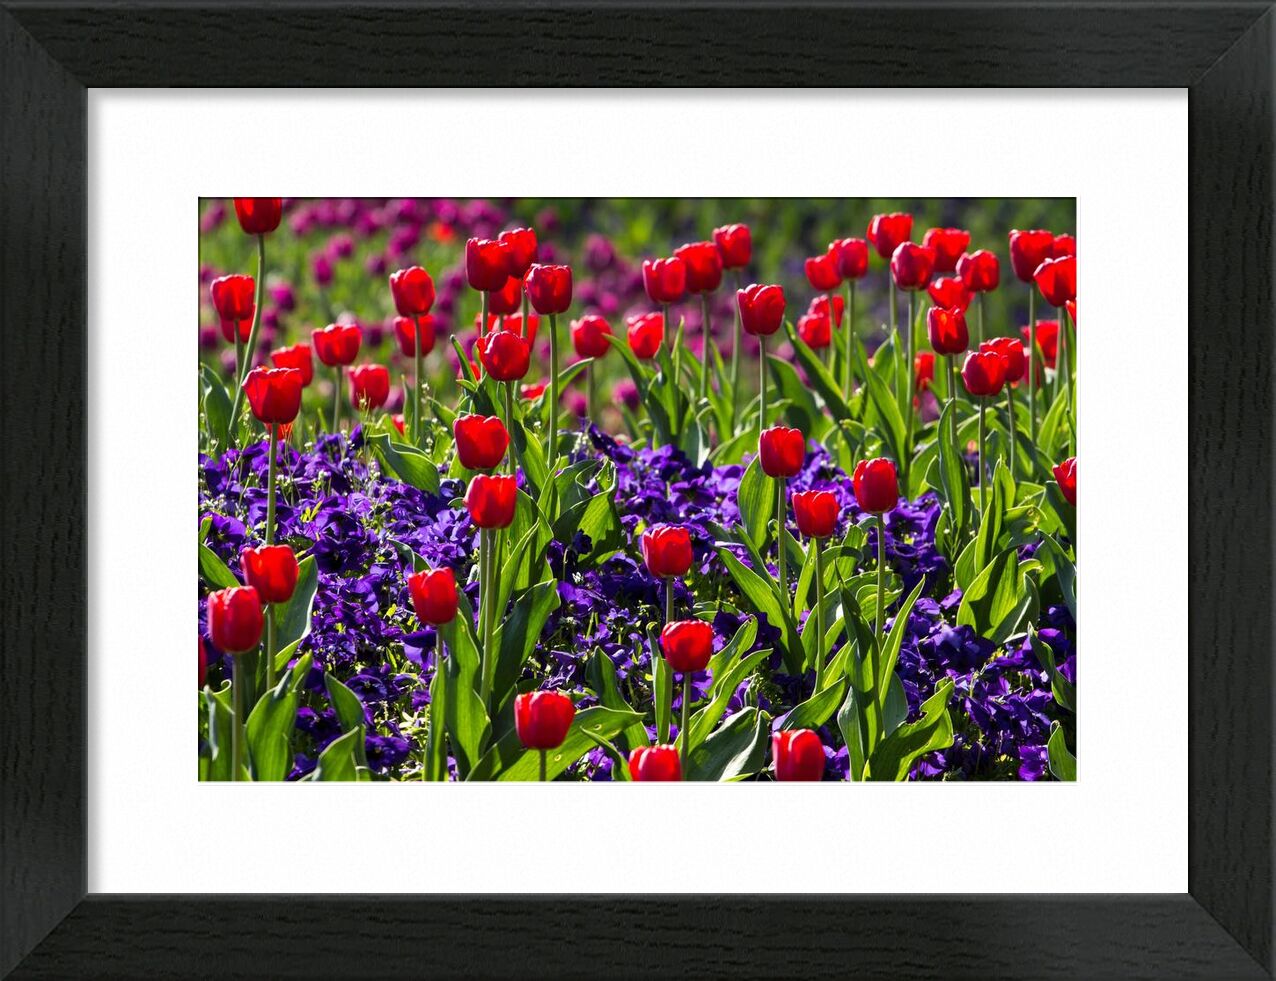 Spring tulips from Pierre Gaultier, Prodi Art, bloom, blossom, flora, flowers, nature, spring, tulips, wild flowers